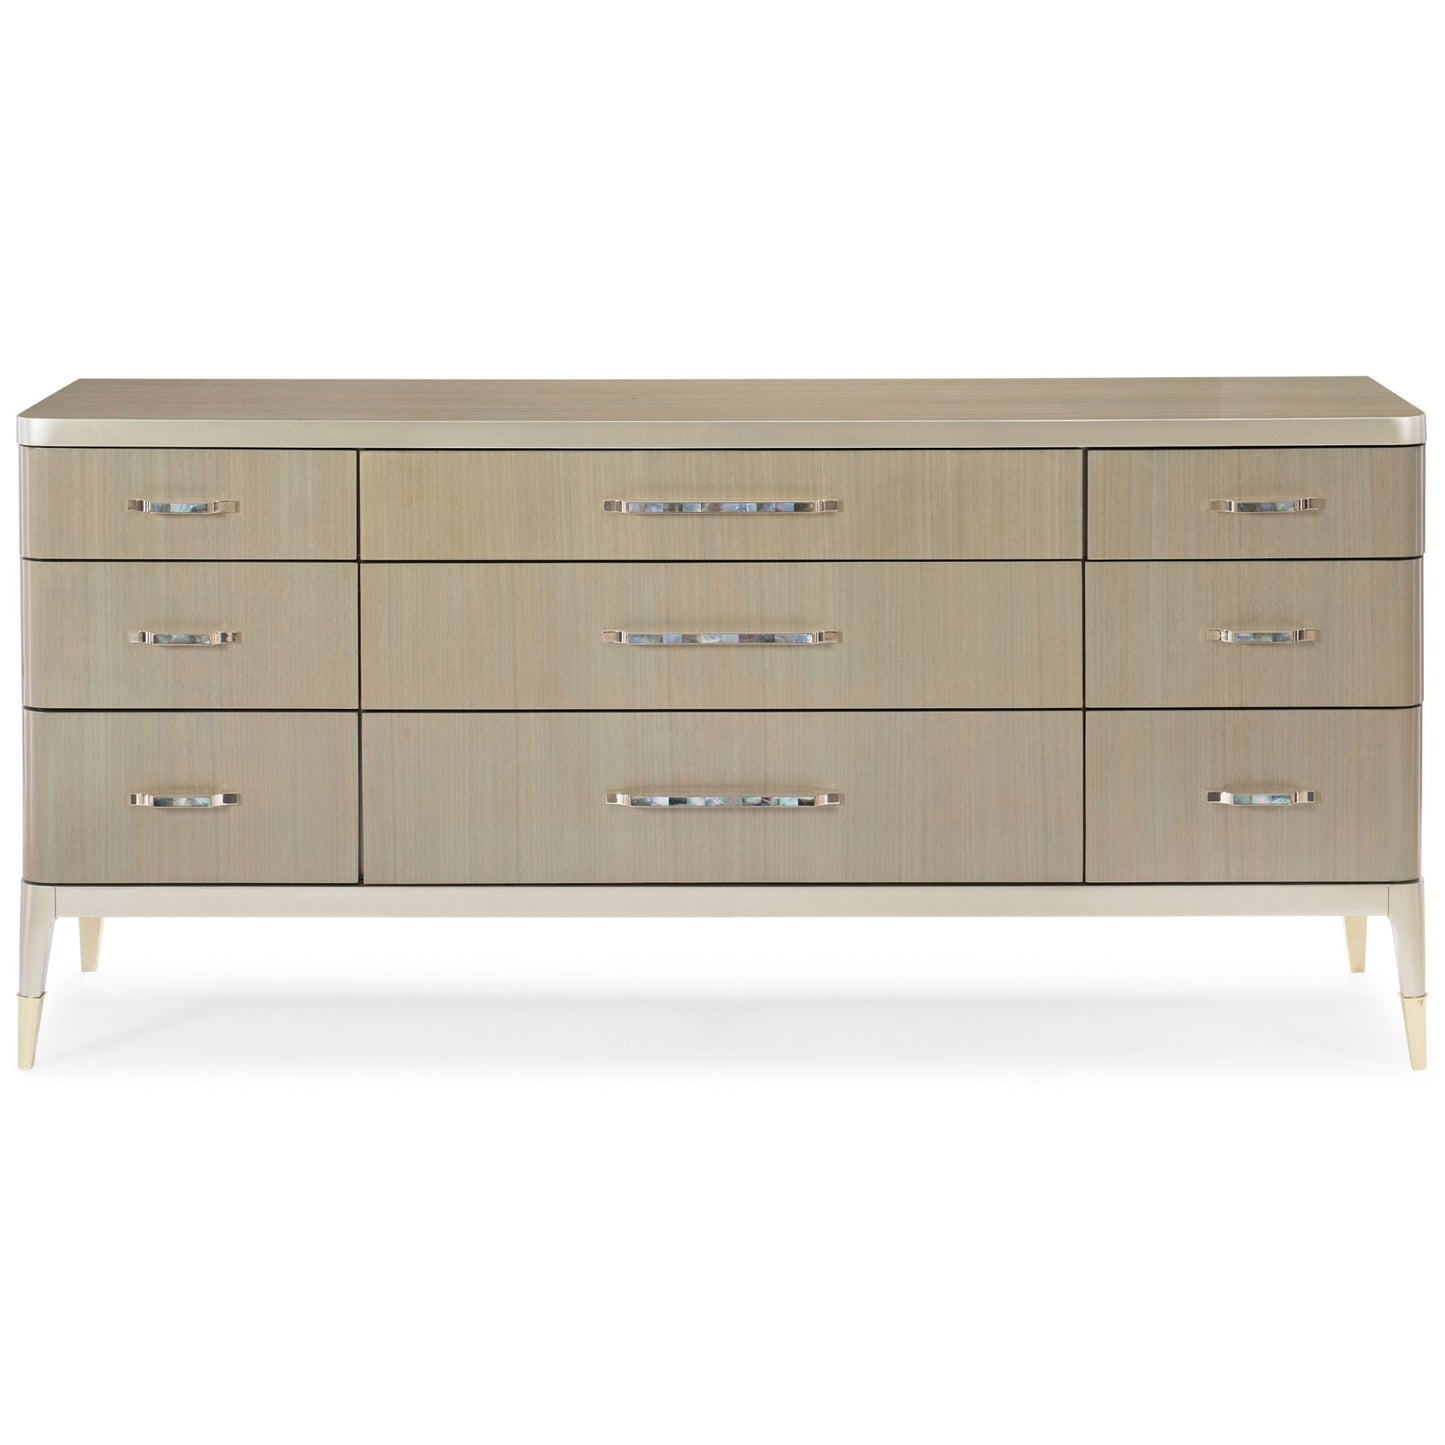 Caracole Classic All Dressed Up Bedroom Dresser